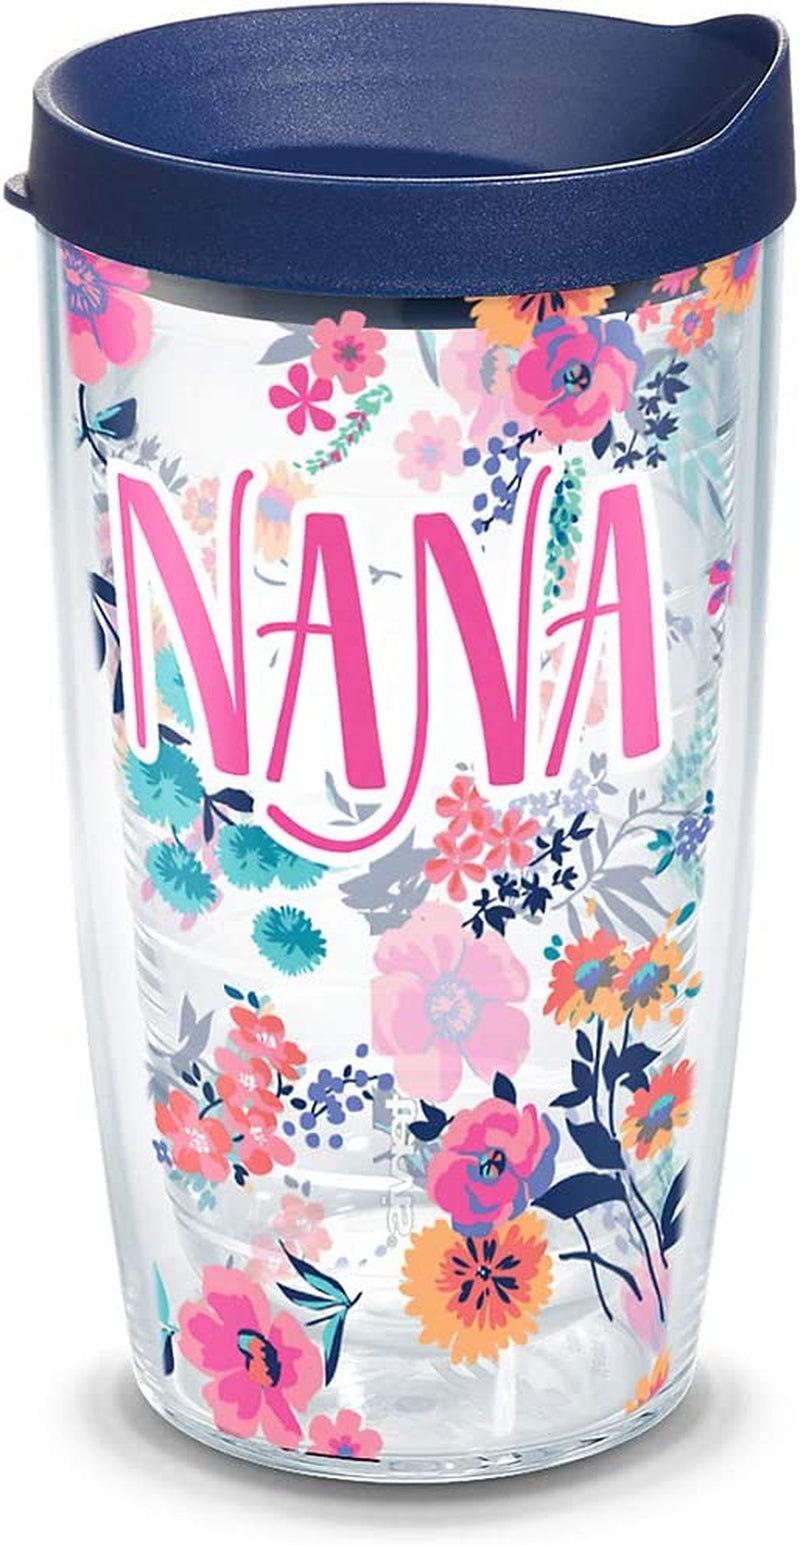 Tervis Made in USA Double Walled Dainty Floral Mother'S Day Insulated Tumbler Cup Keeps Drinks Cold & Hot, 16Oz, Gigi Home & Garden > Kitchen & Dining > Tableware > Drinkware Tervis Nana 16oz 